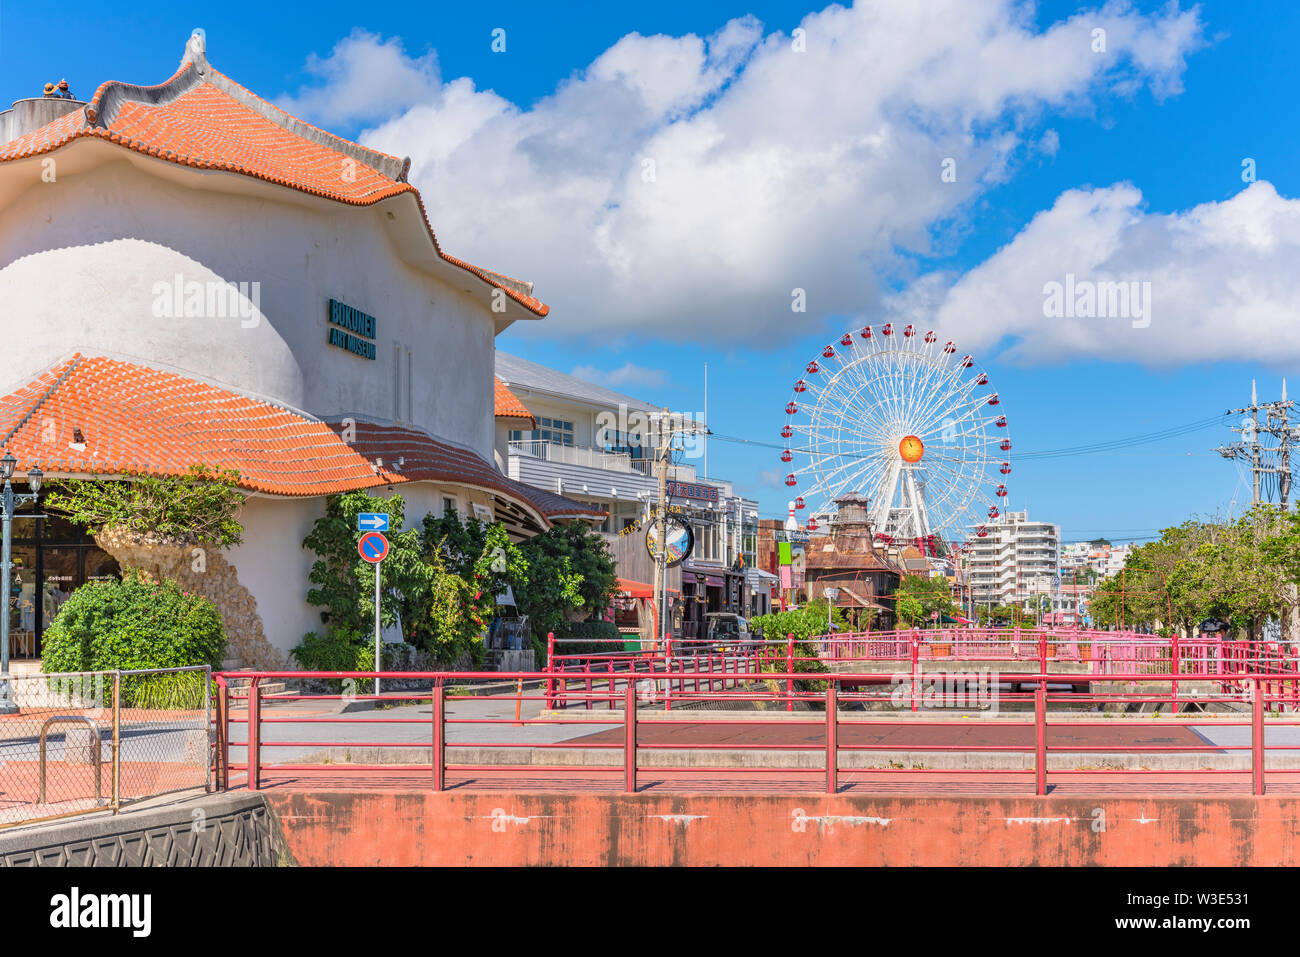 Chatan City red steel bridge and Mihama Carnival Park Ferris wheel in the American Village Stock Photo